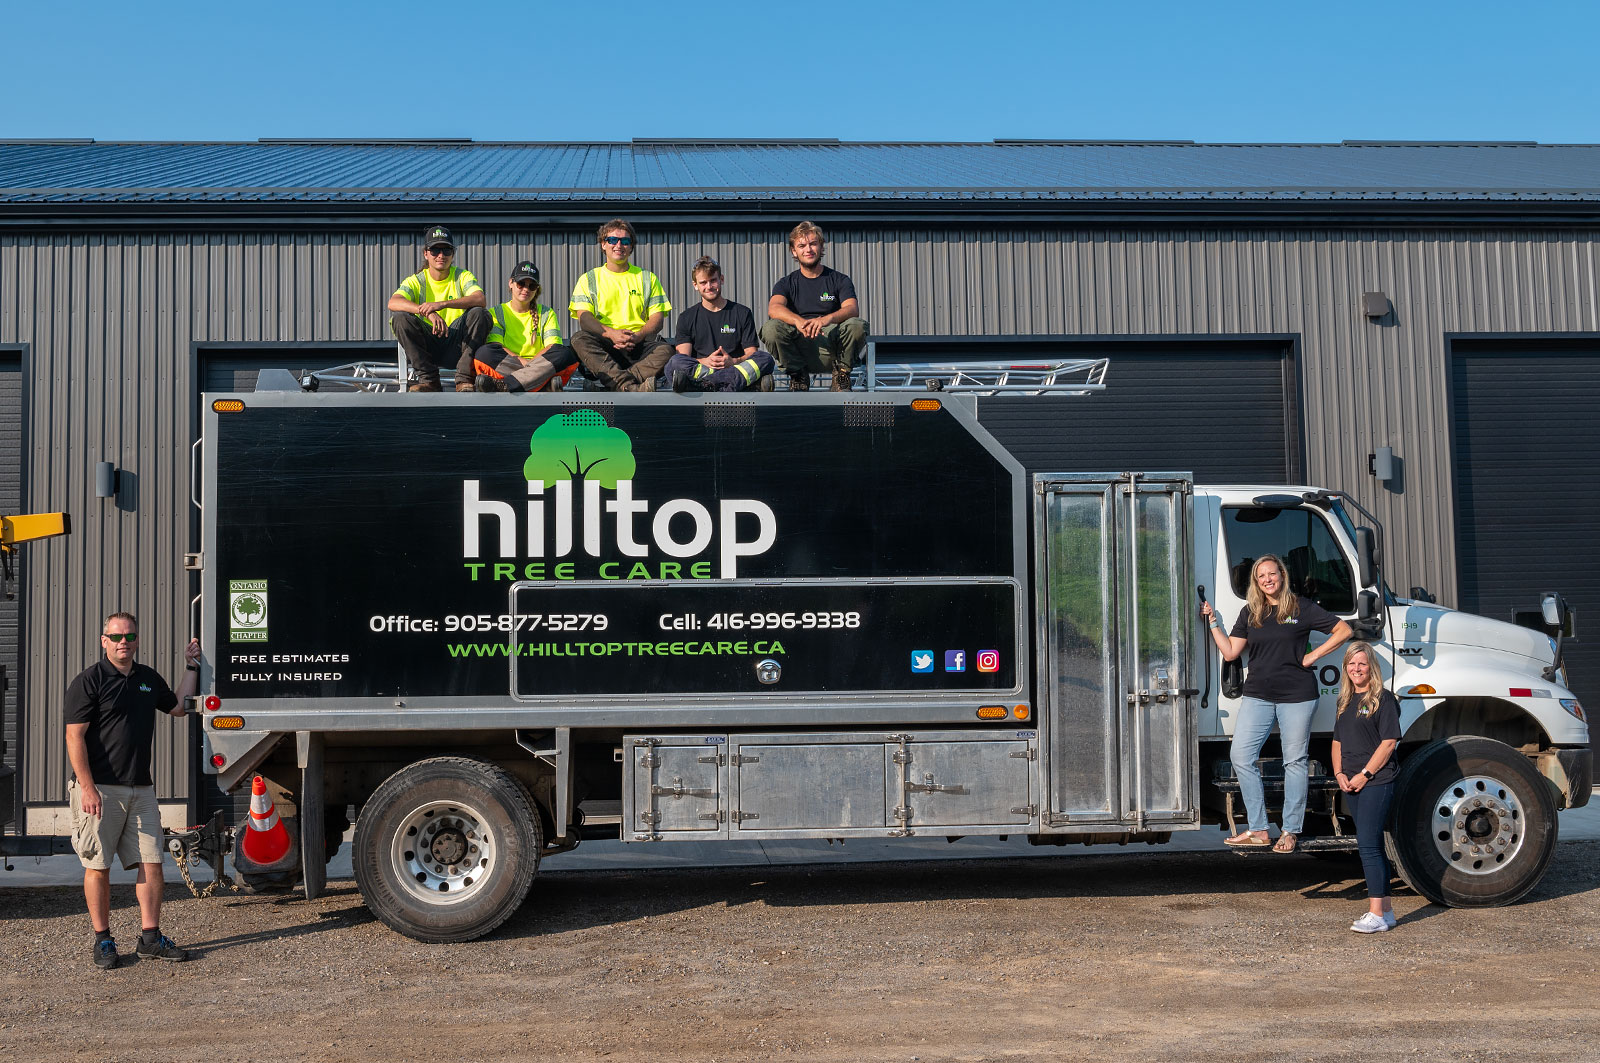 About Hilltop – Insight (mobile)